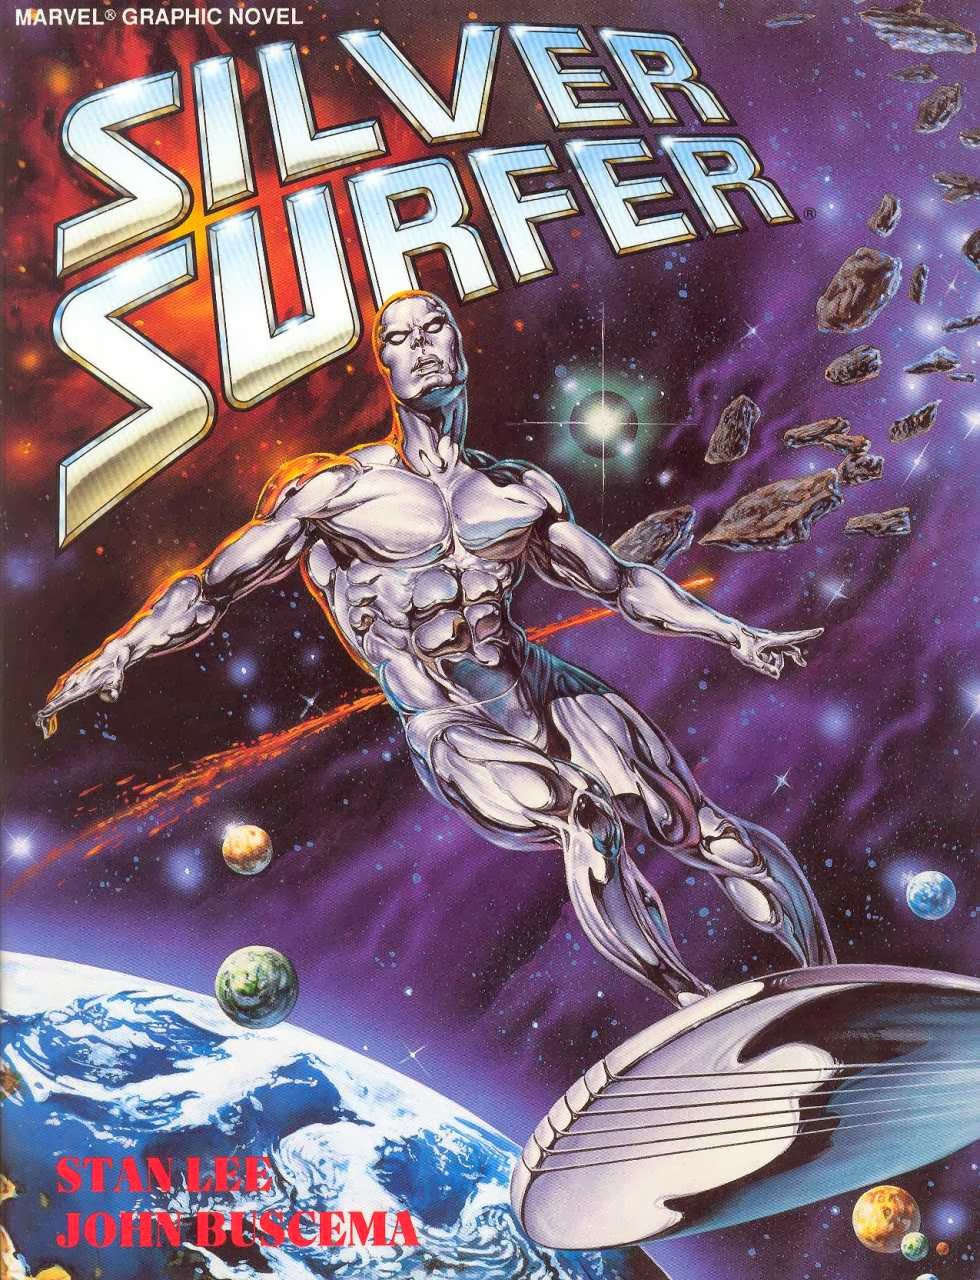 Silver Surfer Reviews and Price Comparisons